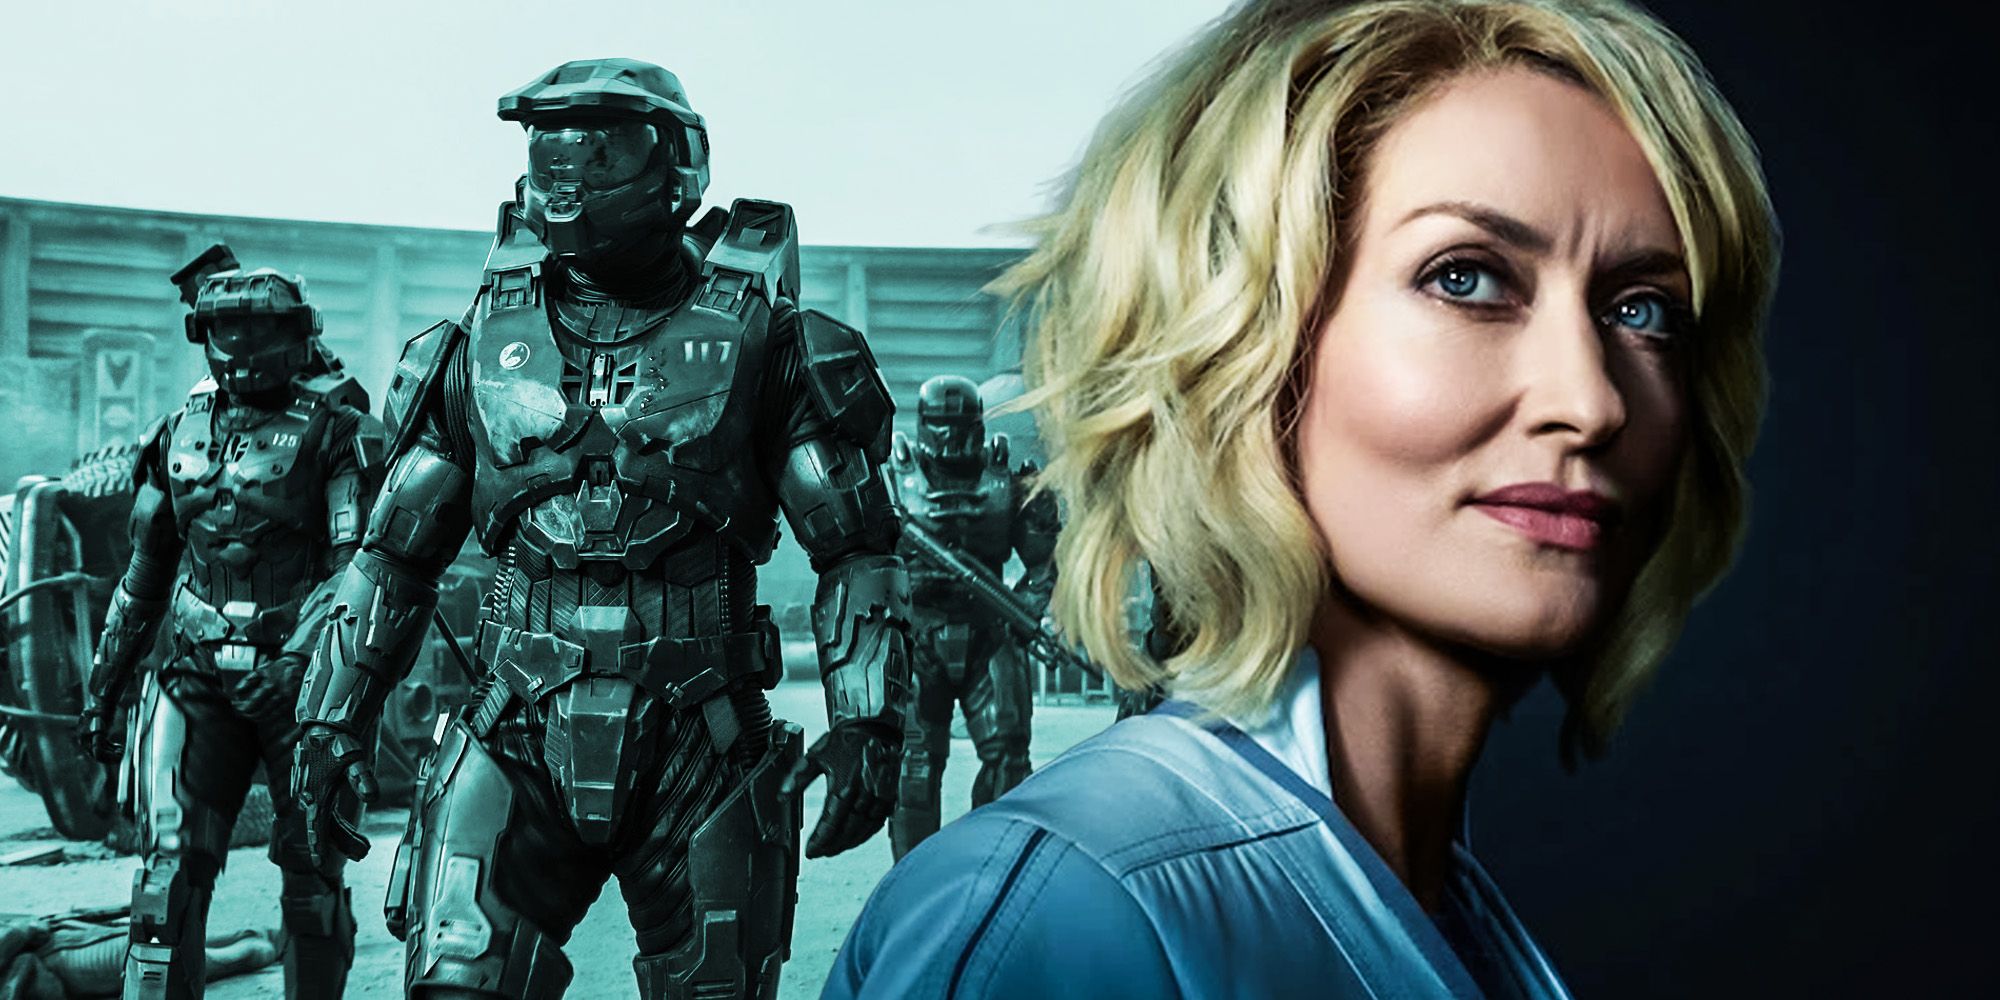 Halo Series Season 2 Release Date Officially Announced!